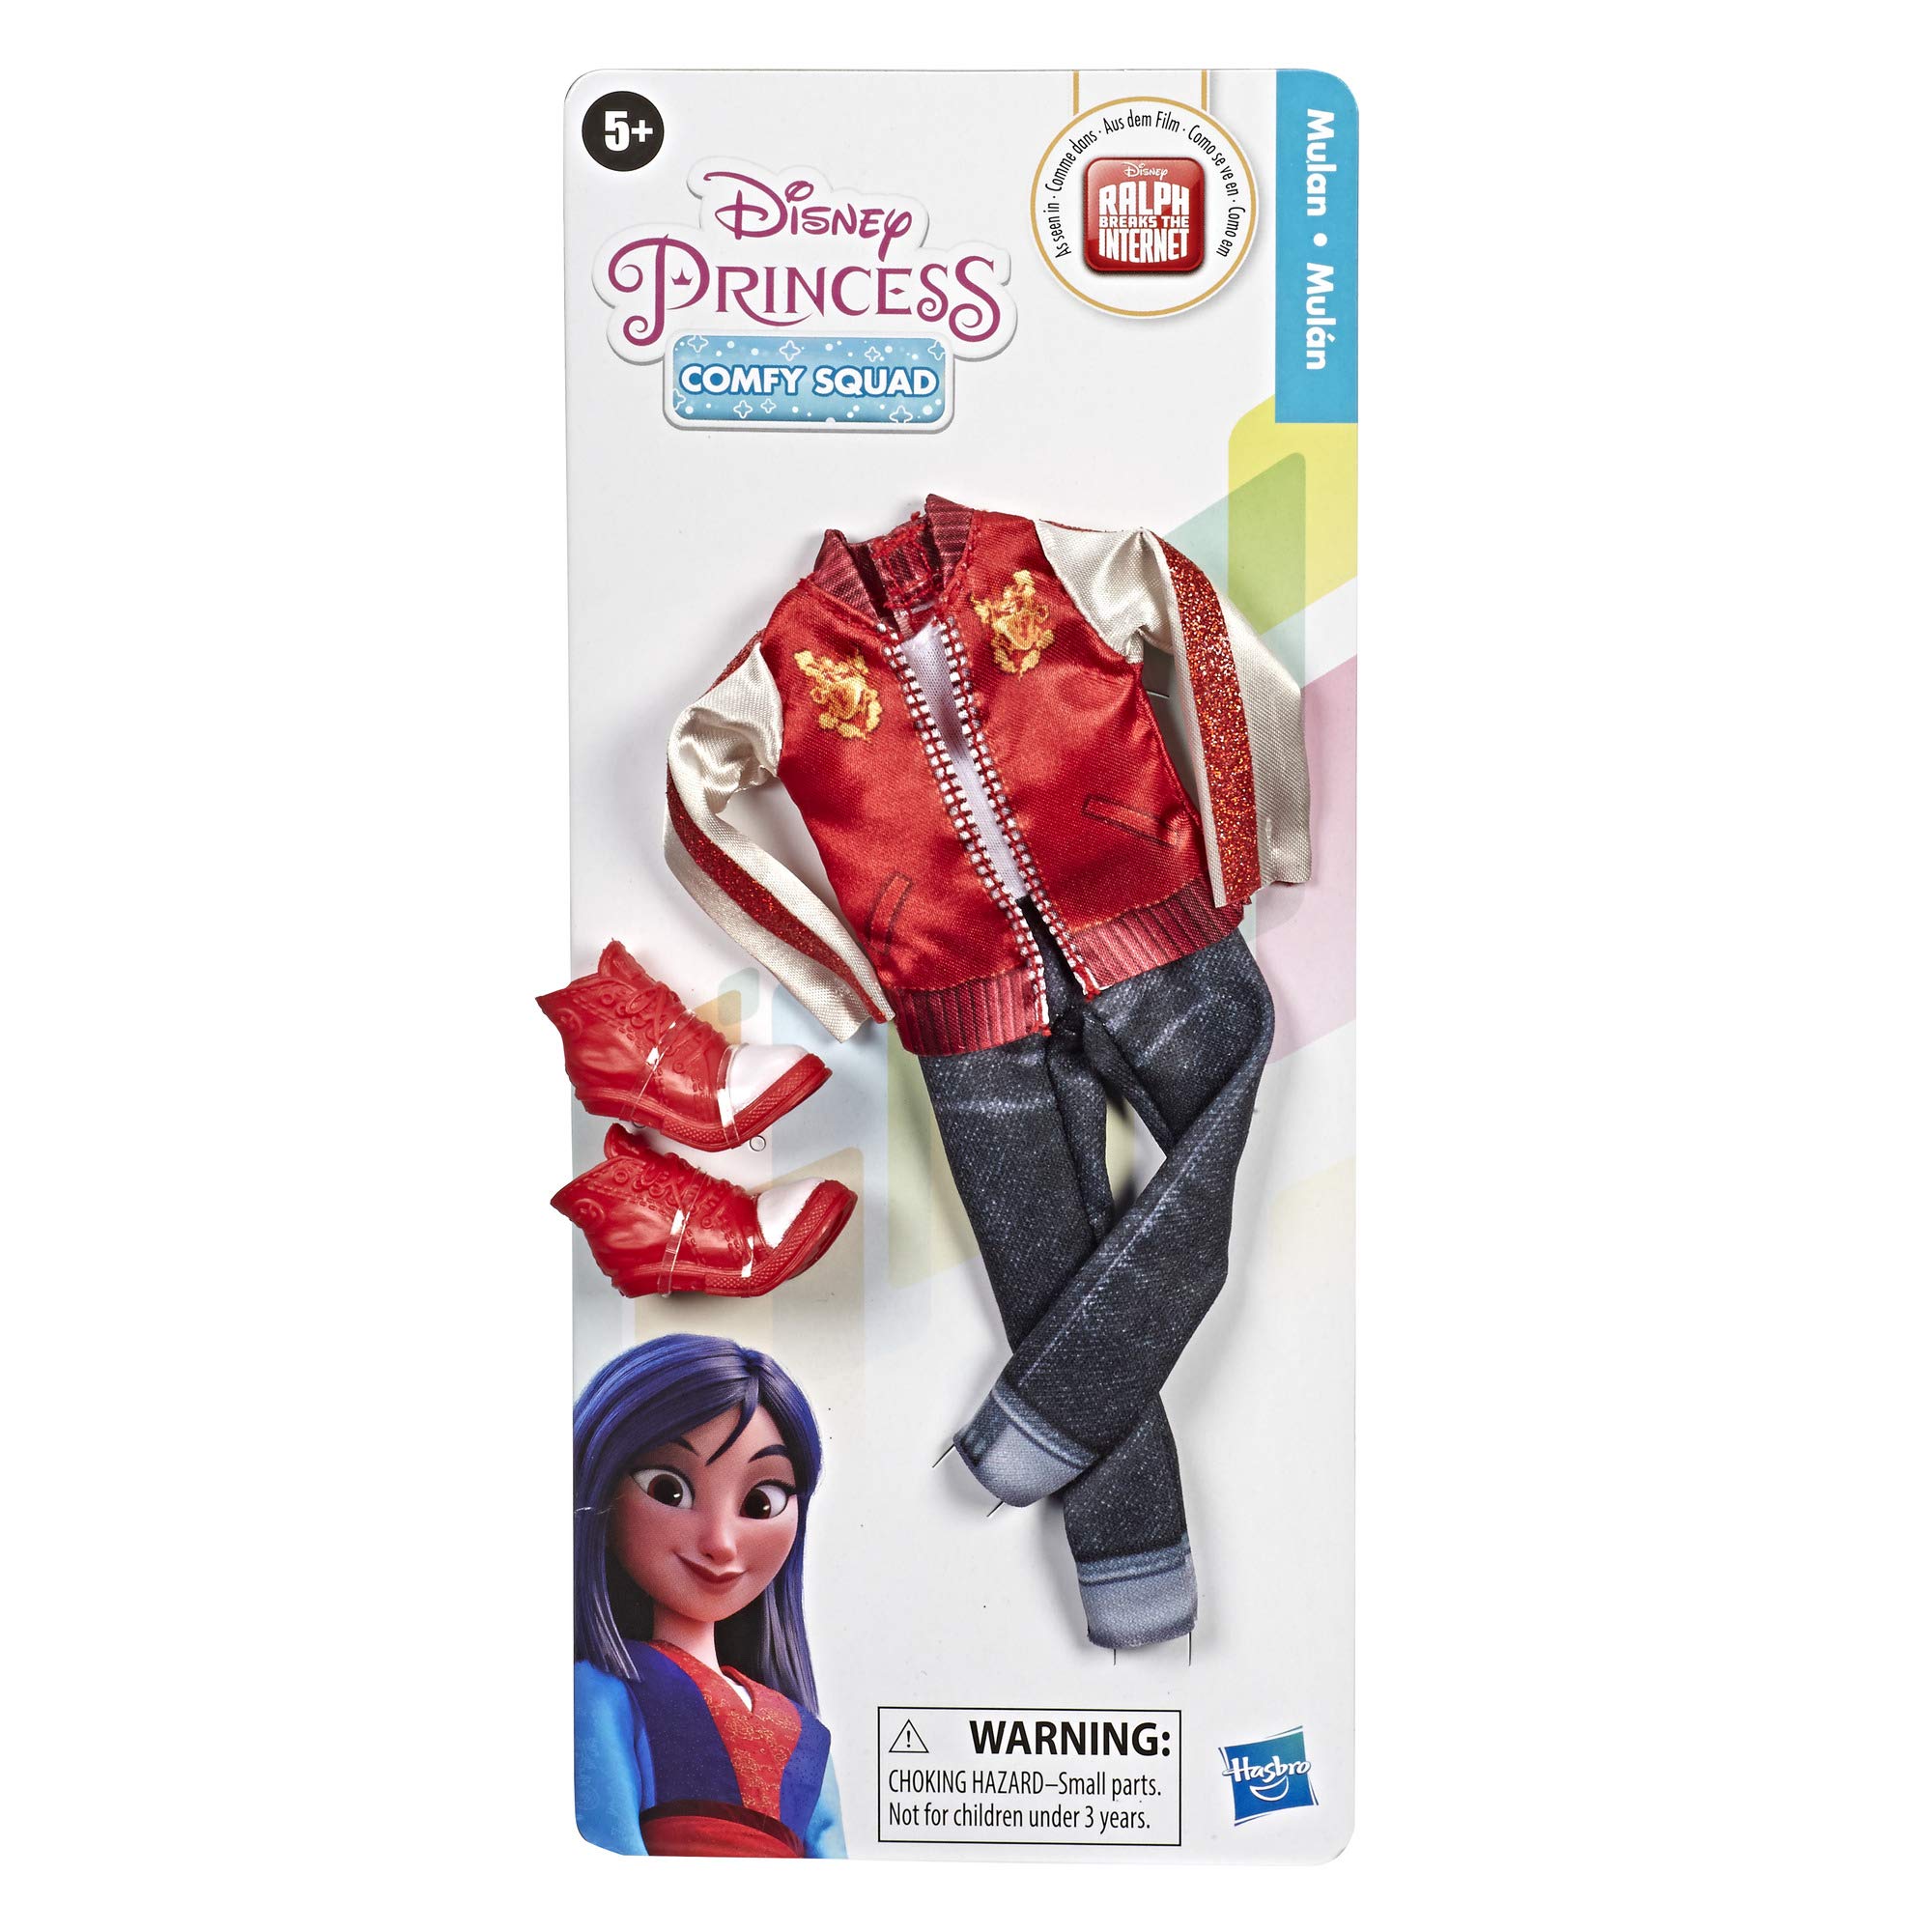 Disney Princess Comfy Squad Fashion Pack for Mulan Doll, Clothes for Disney Fashion Doll Inspired by Ralph Breaks The Internet Movie